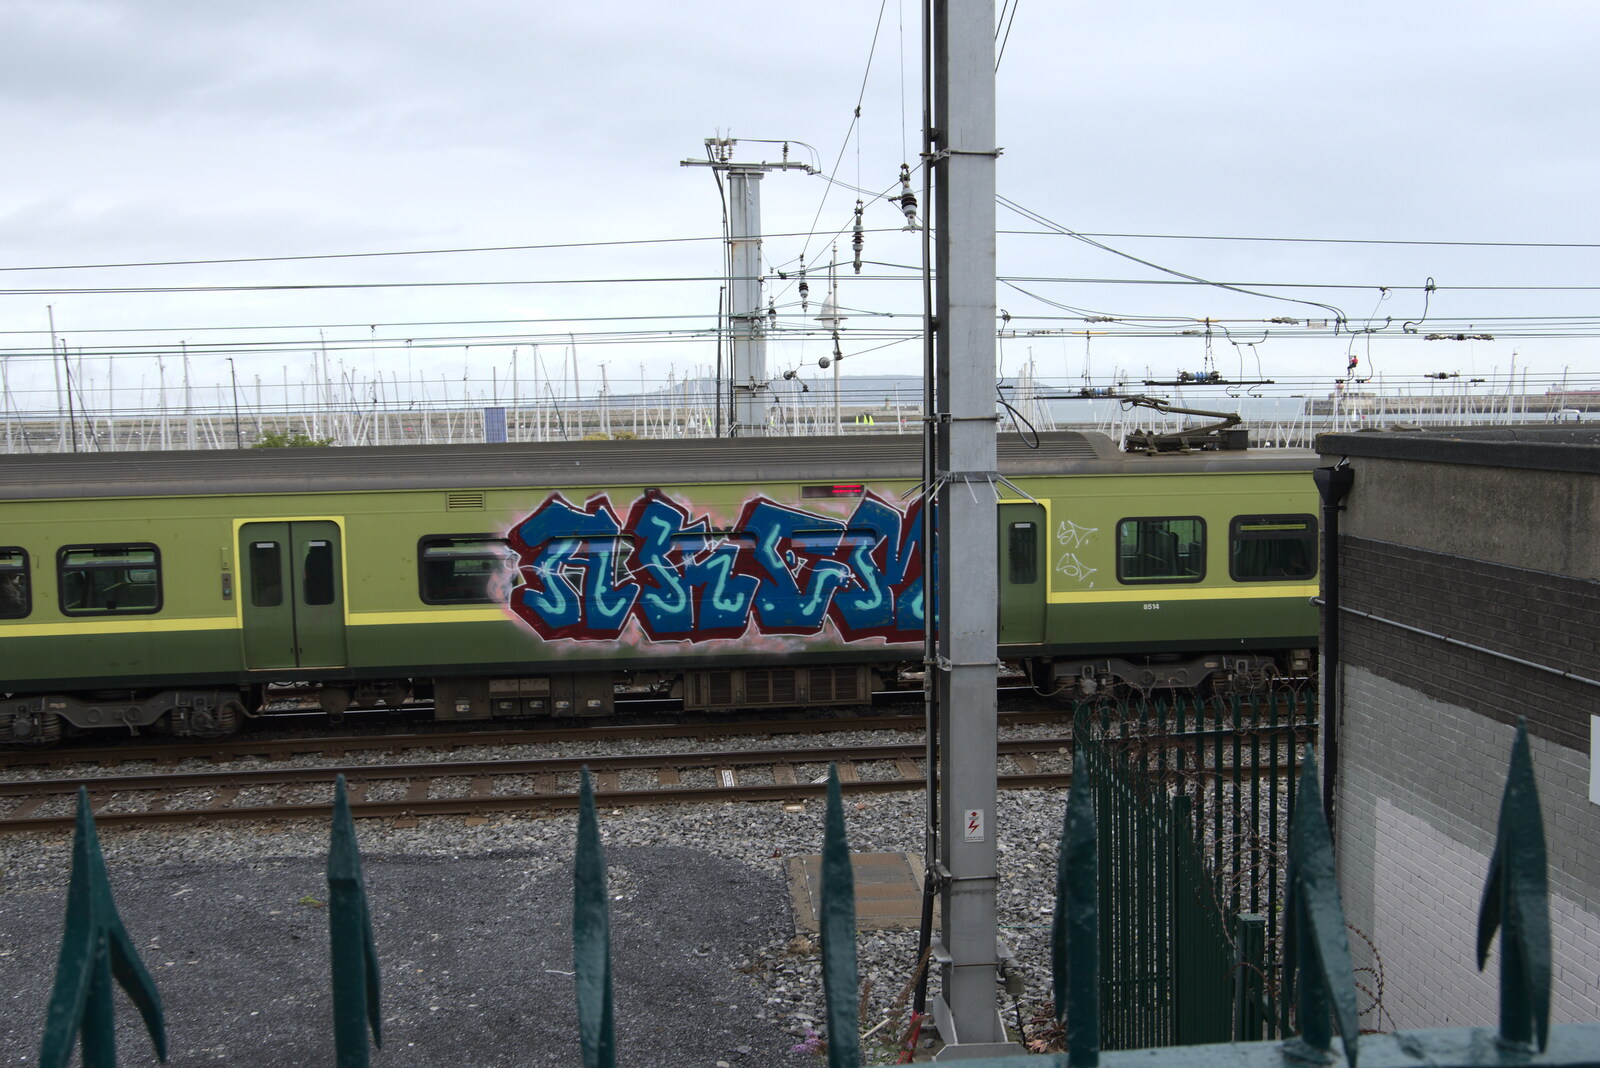 Graffiti on a DART train from Manorhamilton and the Street Art of Dún Laoghaire, Ireland - 15th August 2021